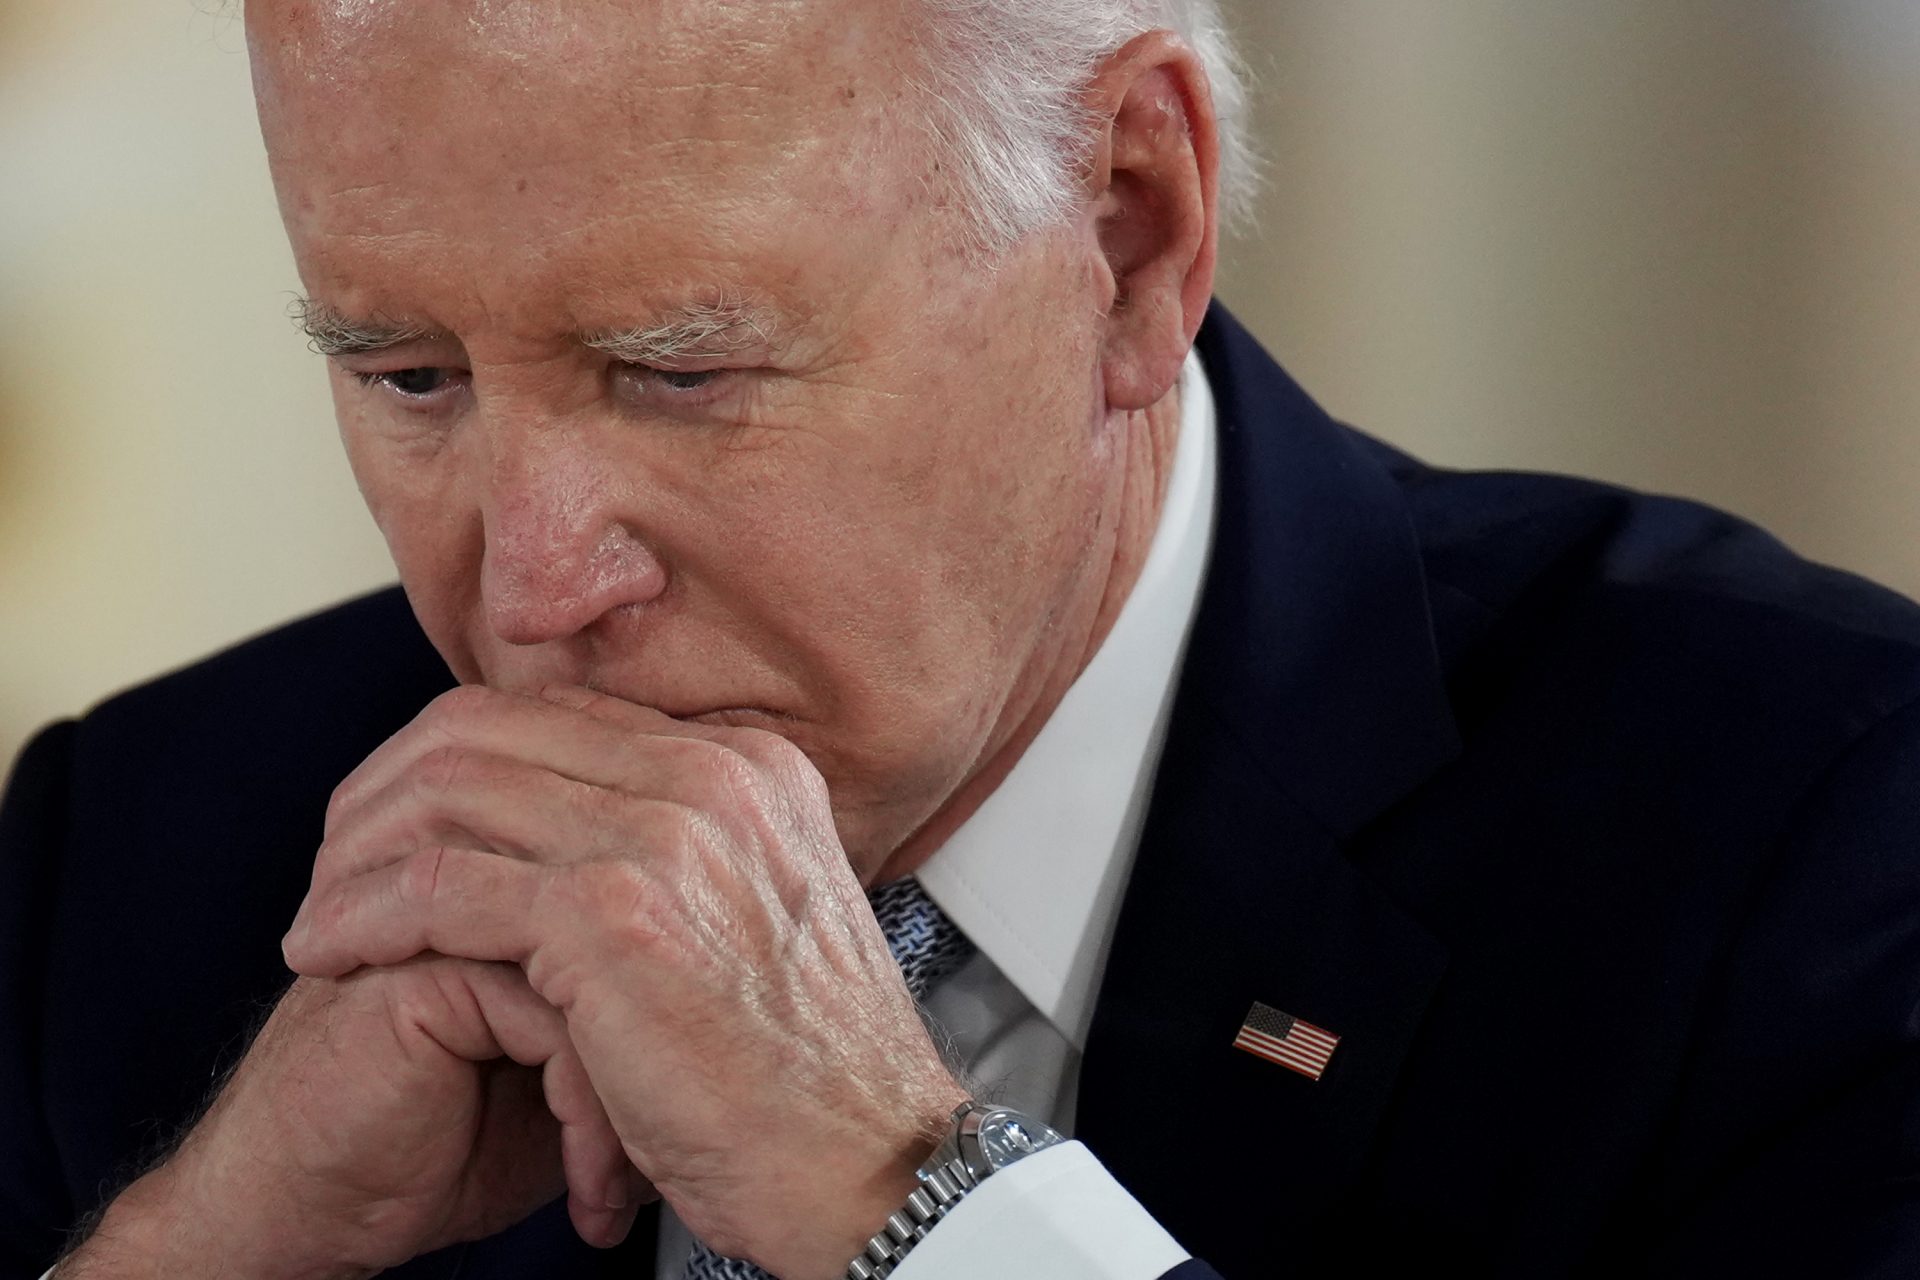 Is Joe Biden fit enough for 4 more years in office?